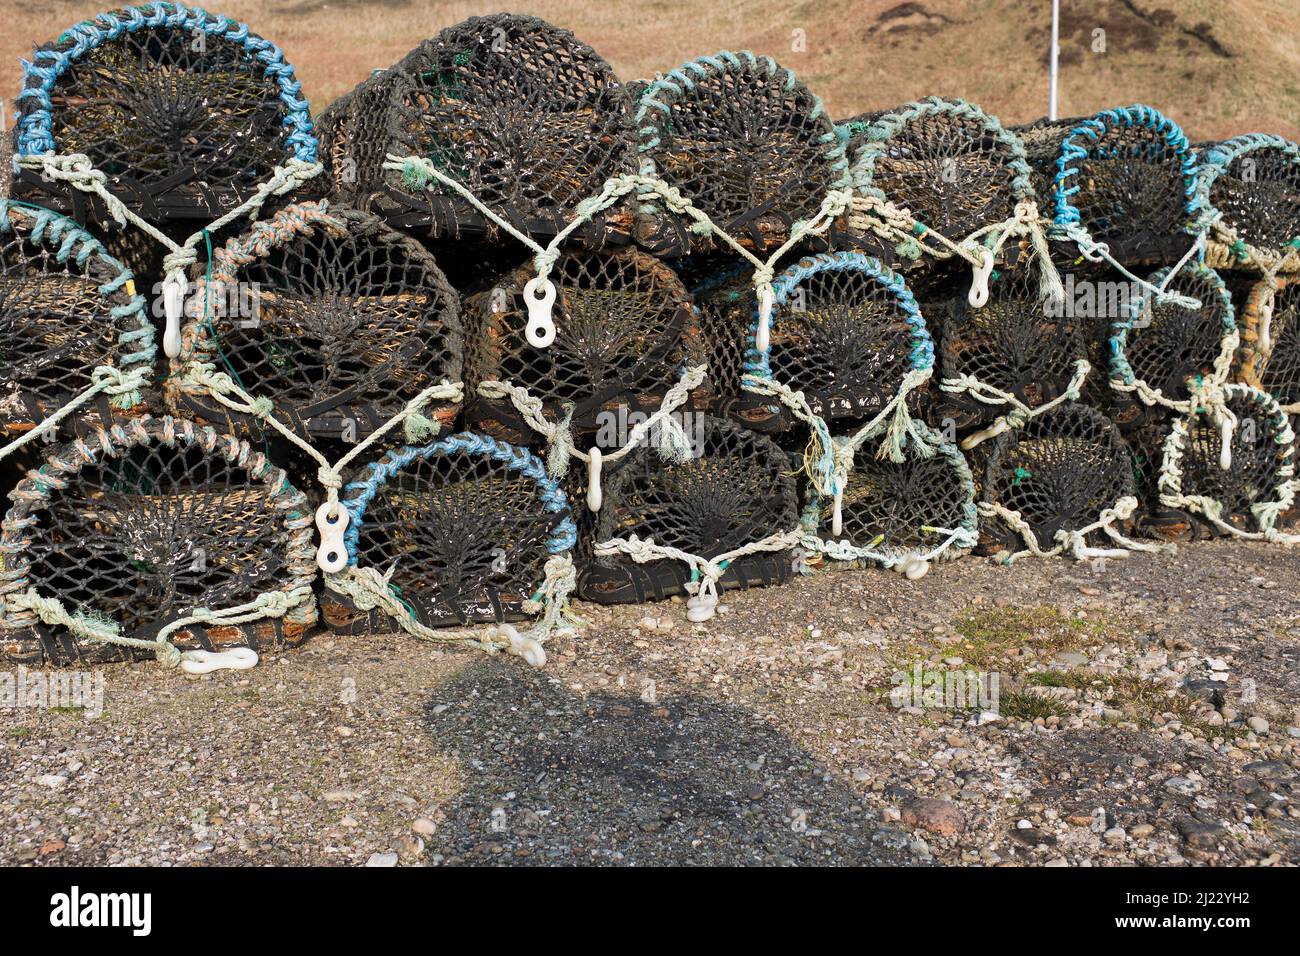 dh Fishermans creels DUNBEATH SUTHERLAND Fisherman lobster fishing crab pots on harbour pier quay creel isolated scotland Stock Photo